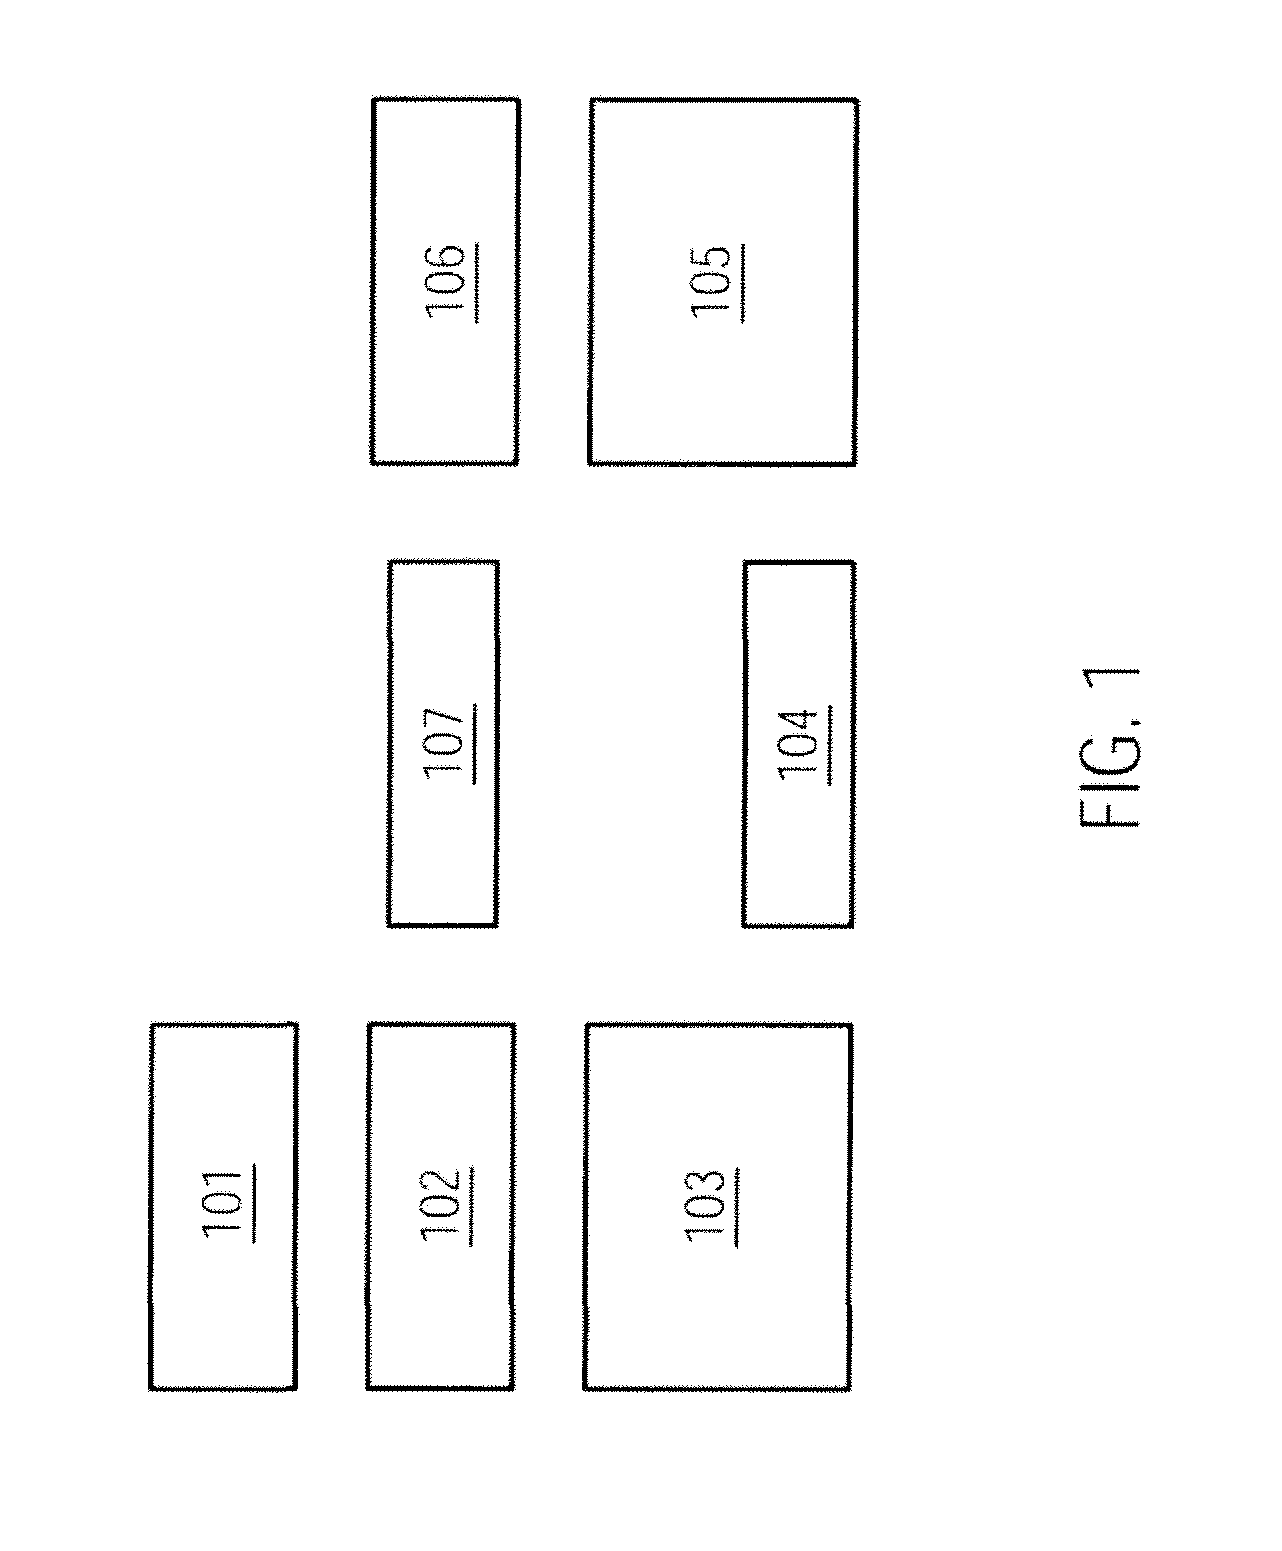 Device and Method for the Partially or Completely Automatic Commissioning of Packs